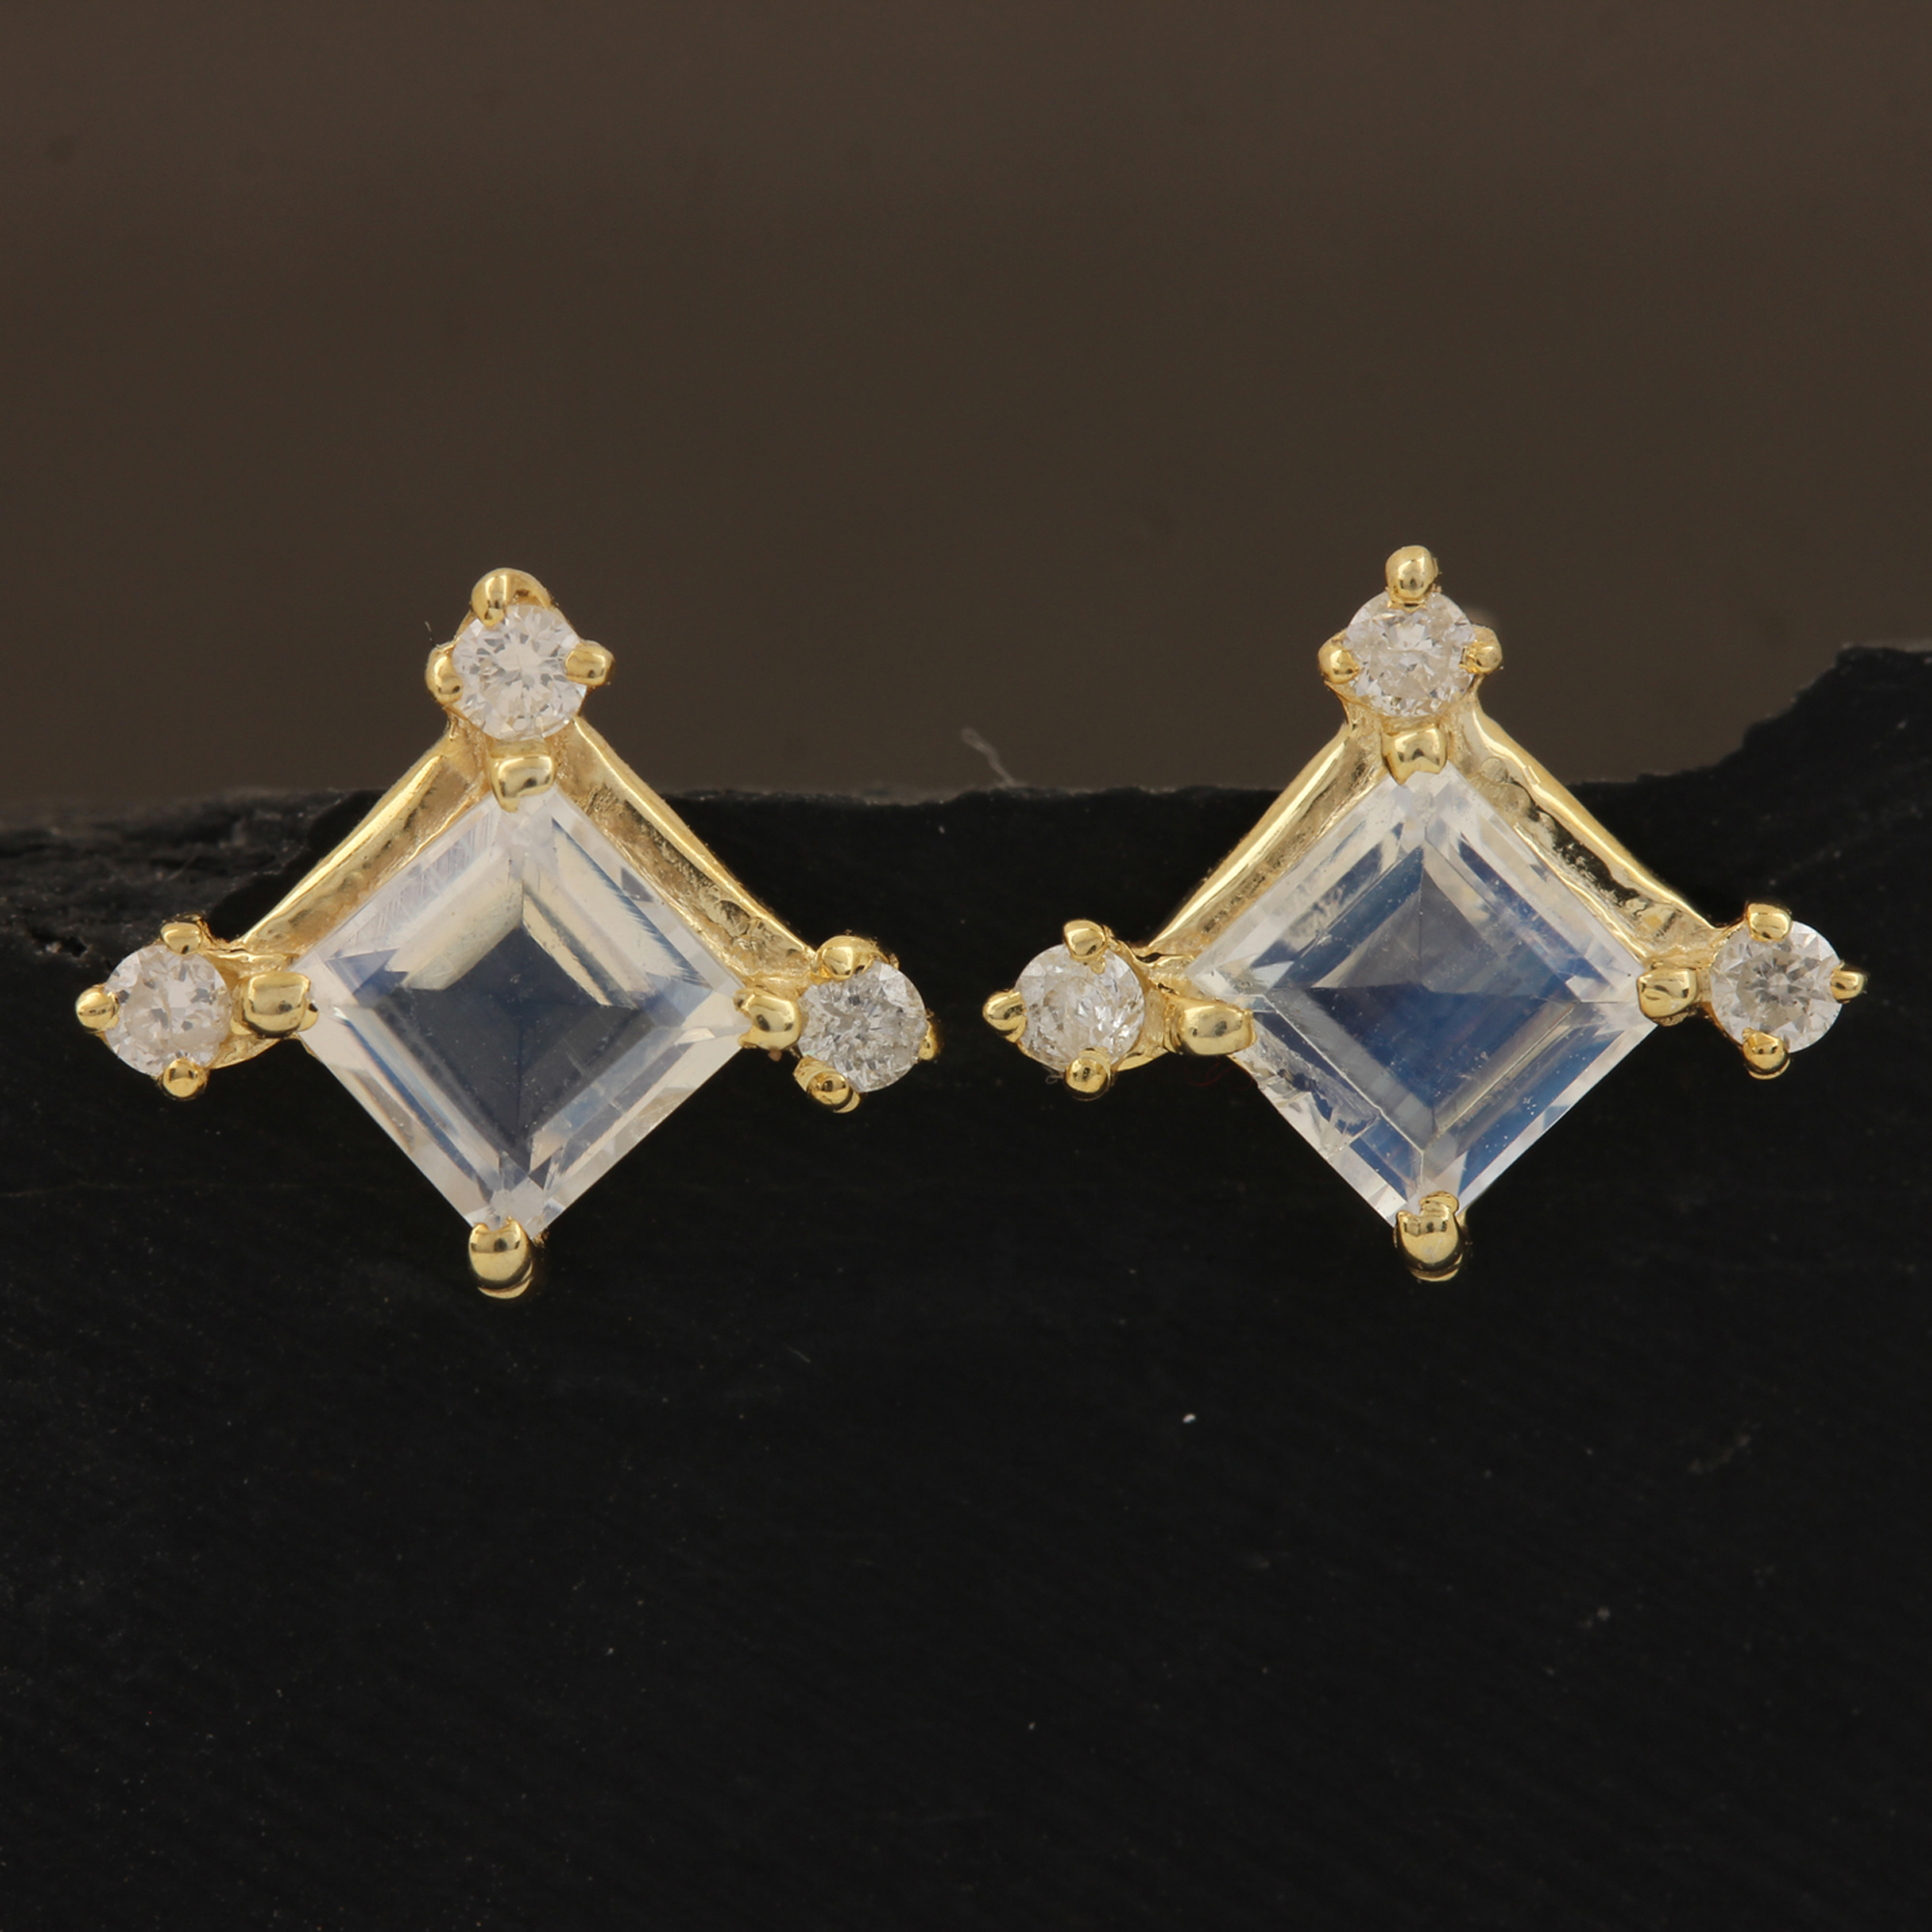 Solid 14k Gold Solitaire Stud Earrings Adorned With Natural Diamond & Moonstone